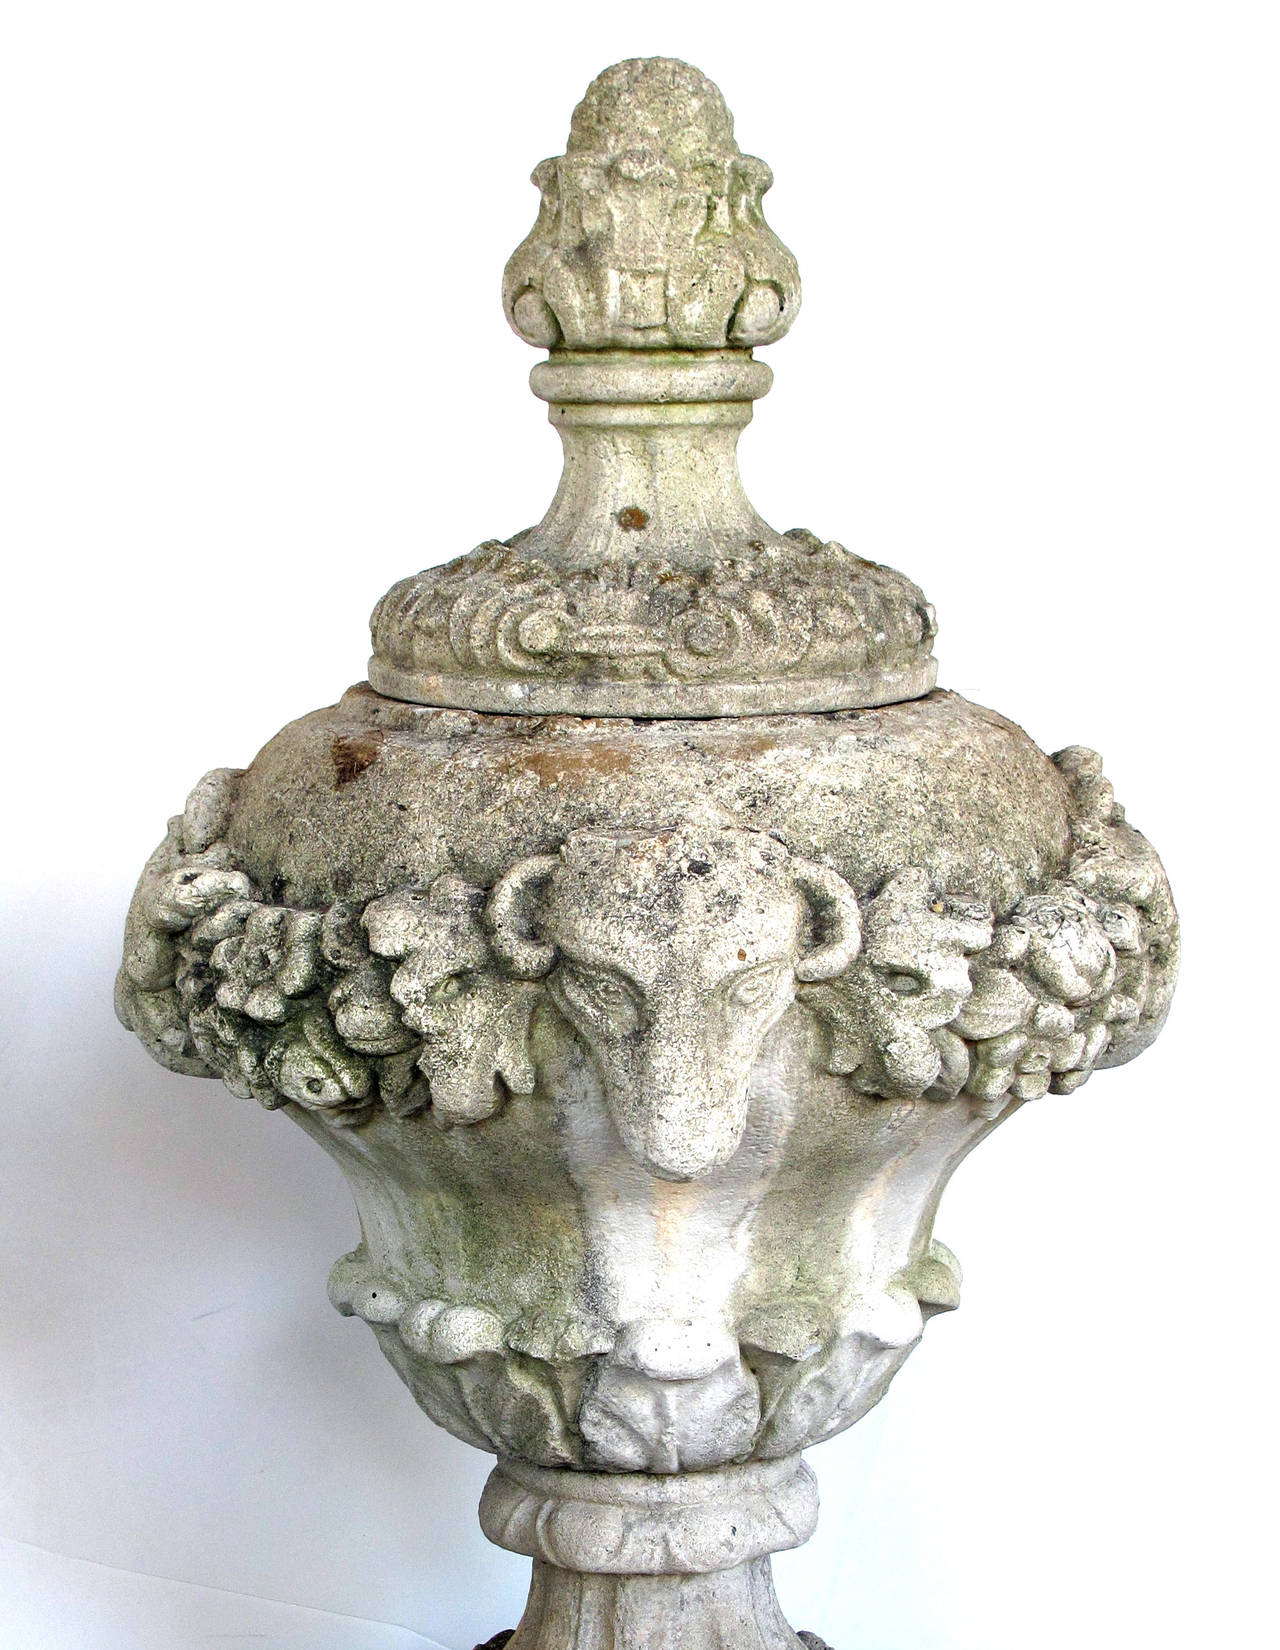 A well-delineated pair of English cast stone urn-form finials with swag and ram's head motif; each tall urn with artichoke finial above a urn-form body with lush perimeter swag